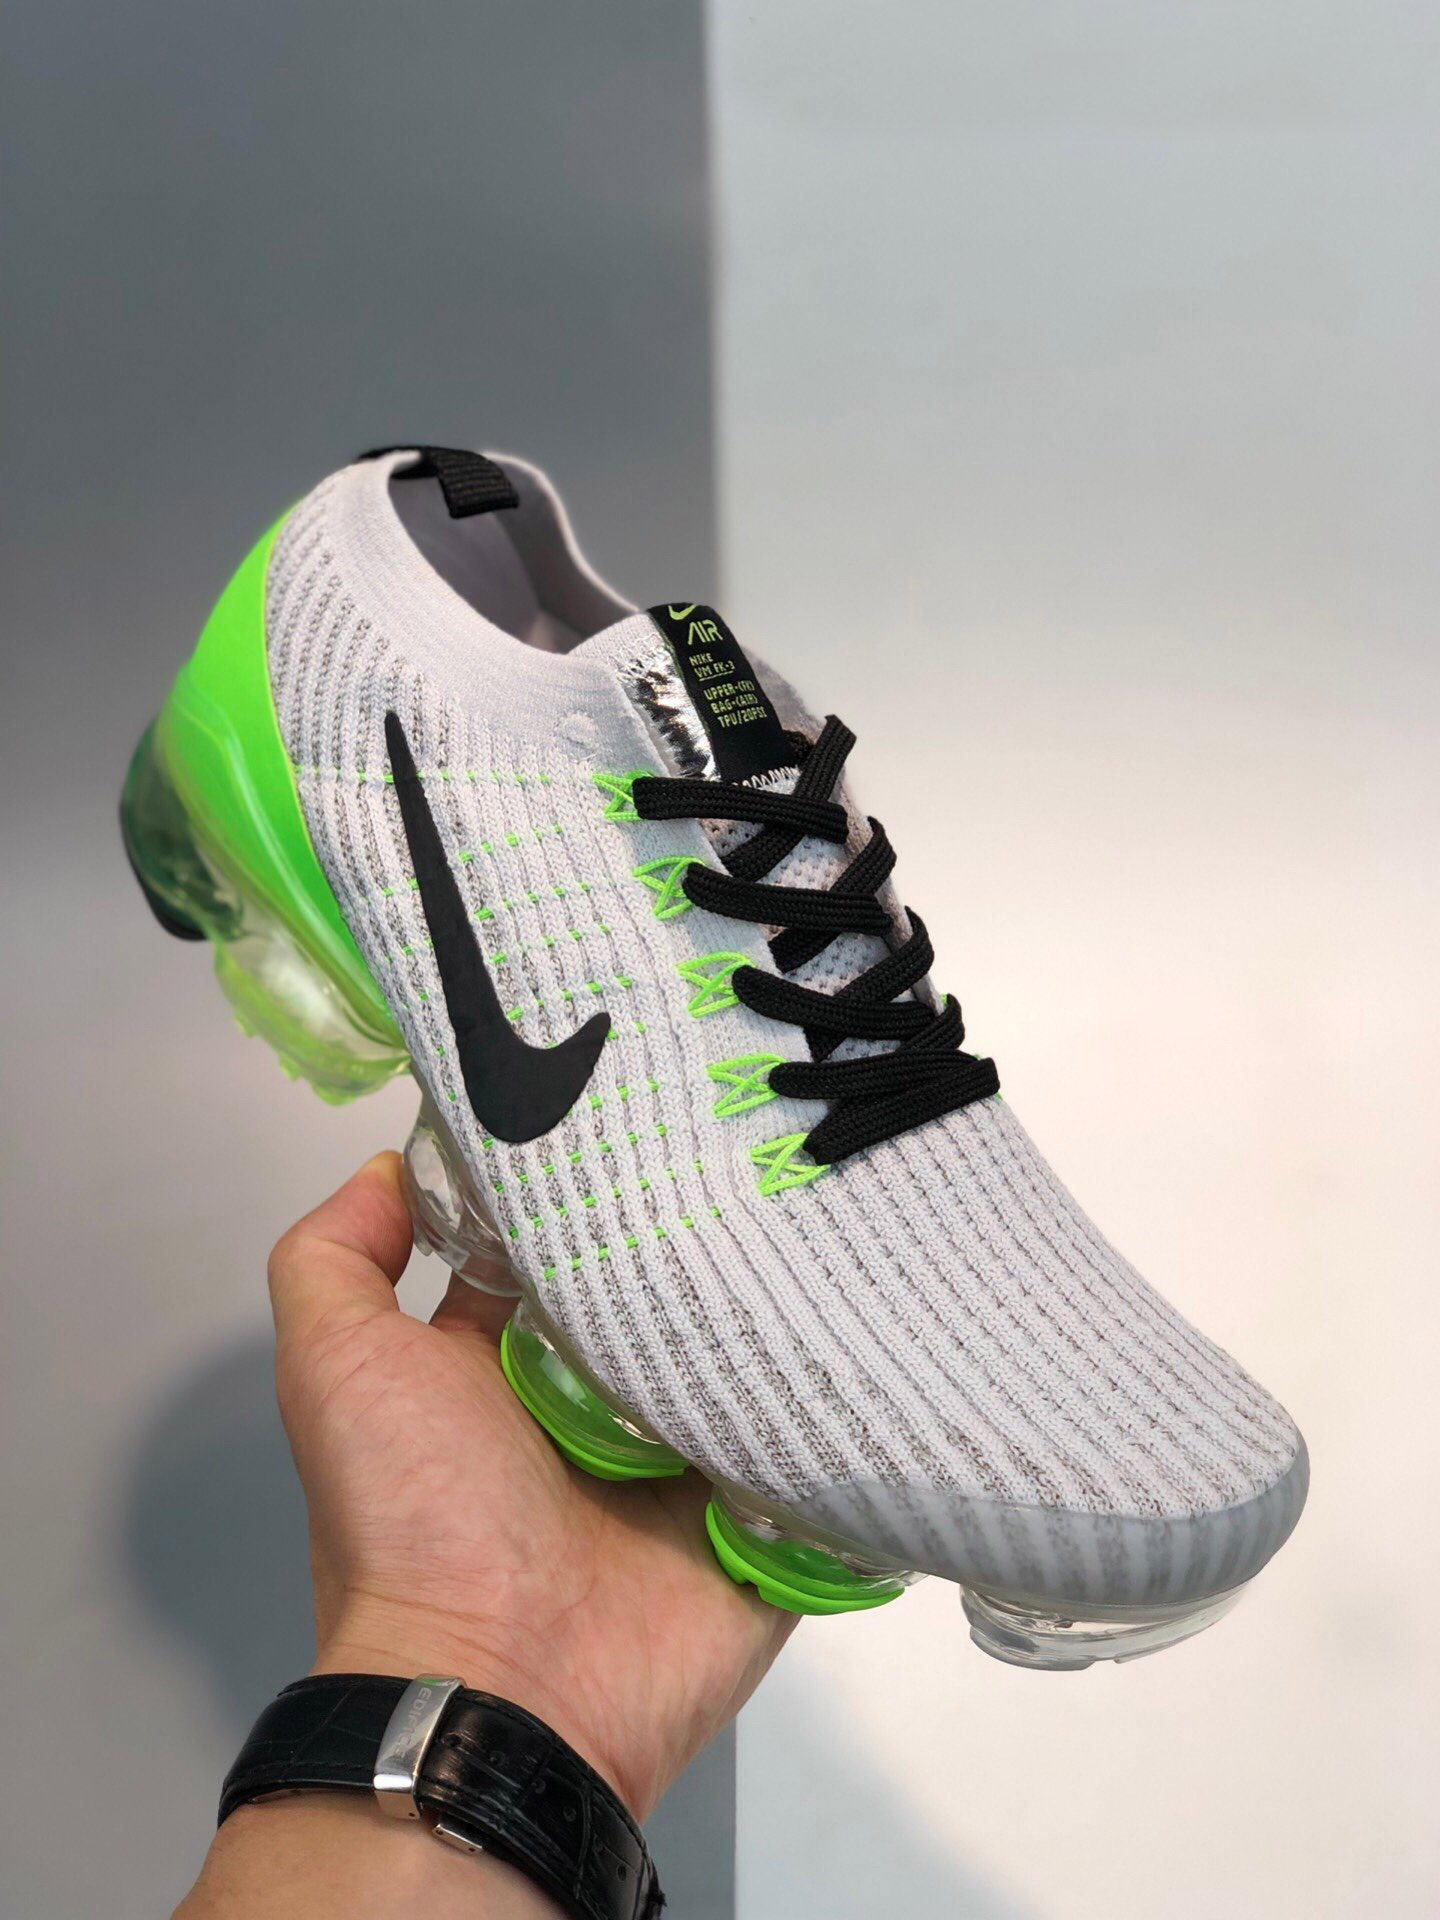 Nike Air VaporMax 3.0 Vast Grey/Electric Green-White-Off Noir Shoes